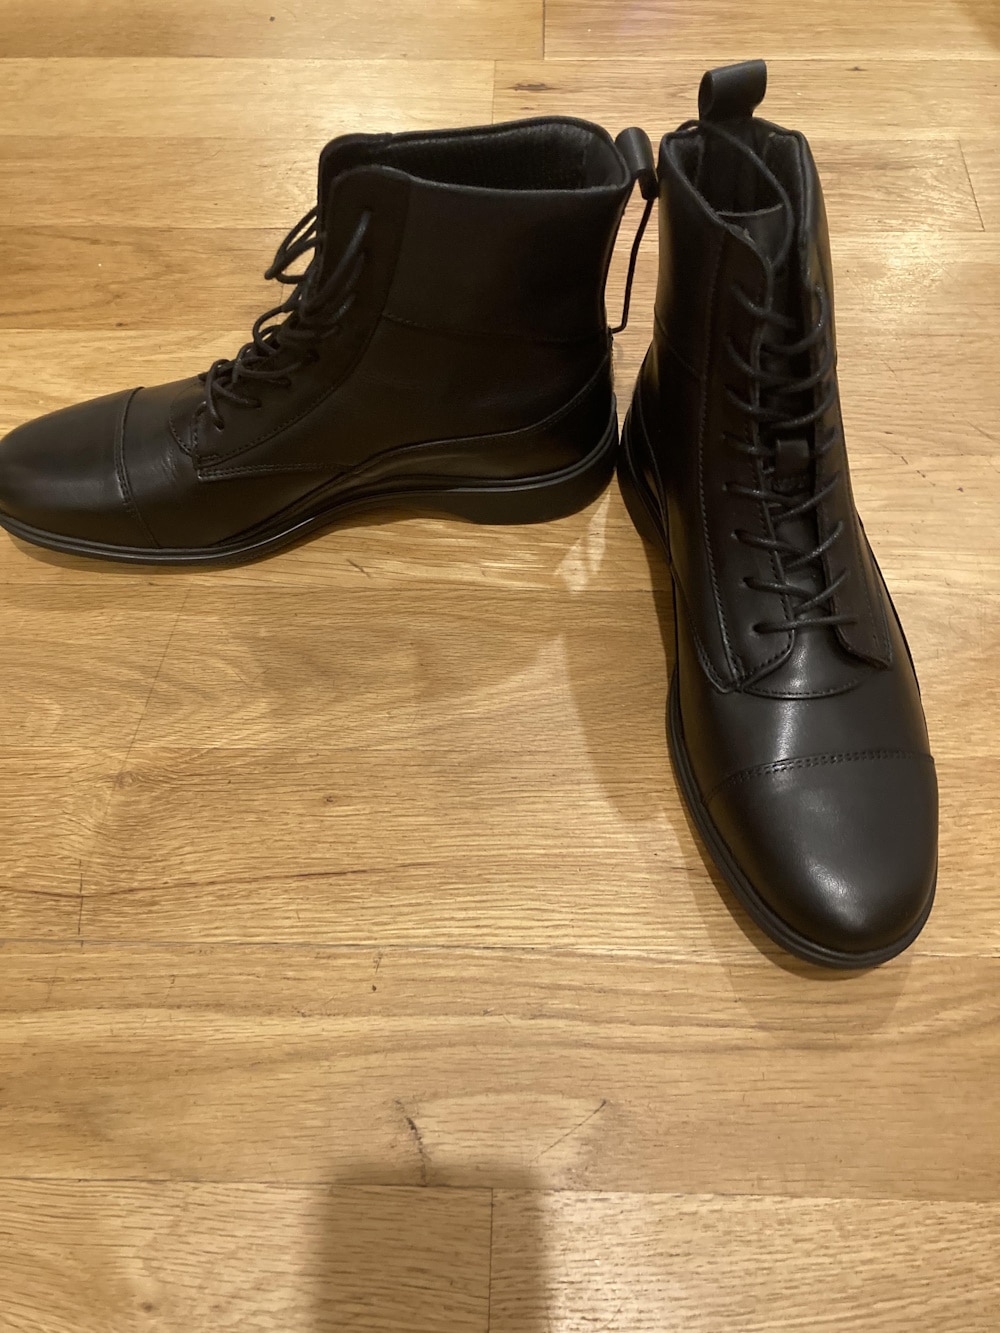 Amberjack Boots Review - The Modest Man